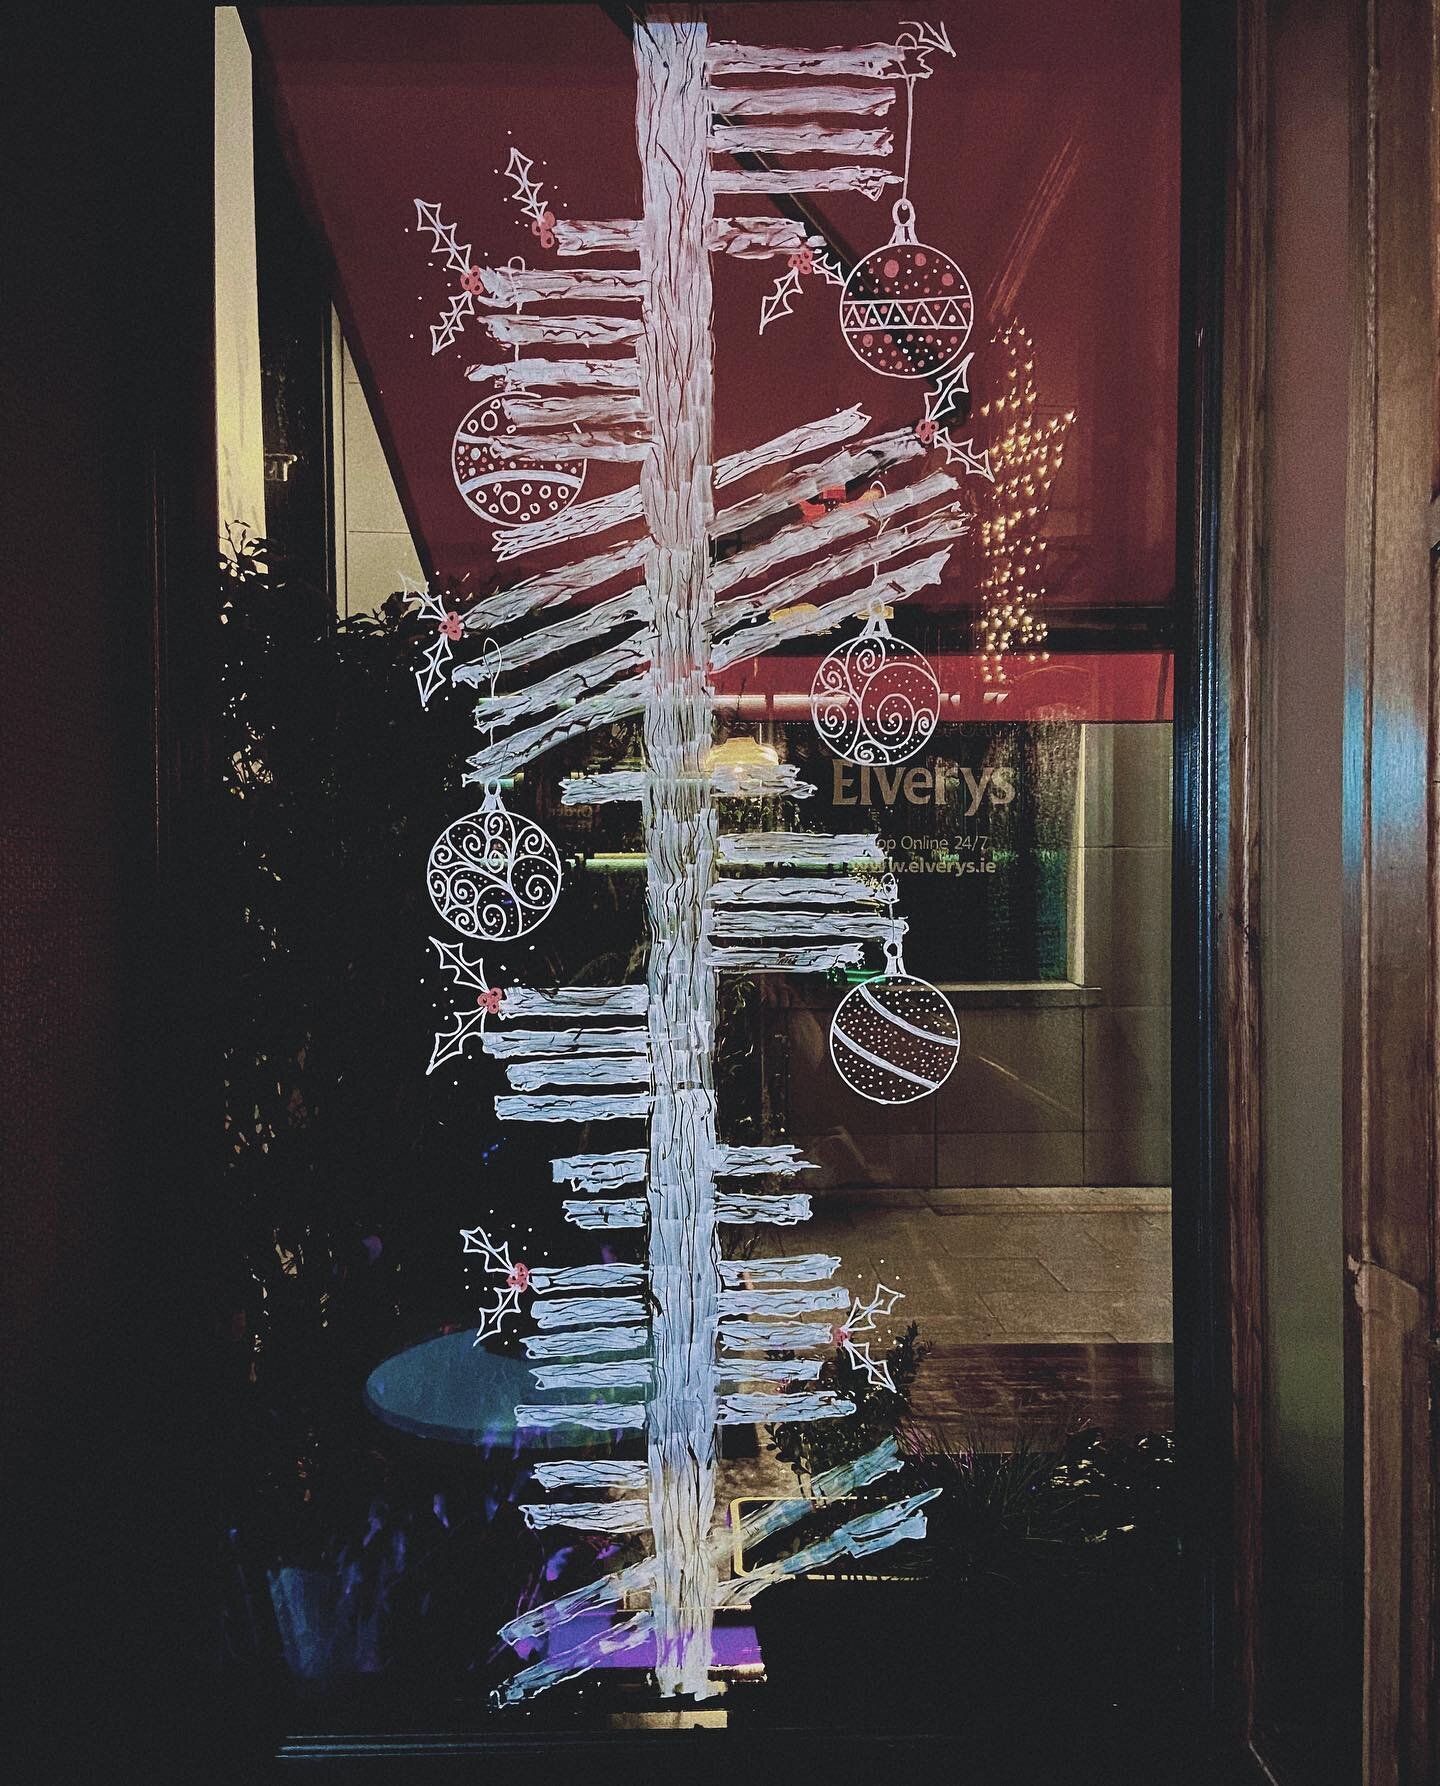 You may not have noticed our wonderful window design by our own colleague, Mark 🙌🏼

Ogham writing in the form of a Christmas tree🎄 

In old writing it spells &lsquo;Happy Christmas&rsquo;
We&rsquo;re very proud of it! ✨

So next time you&rsquo;re 